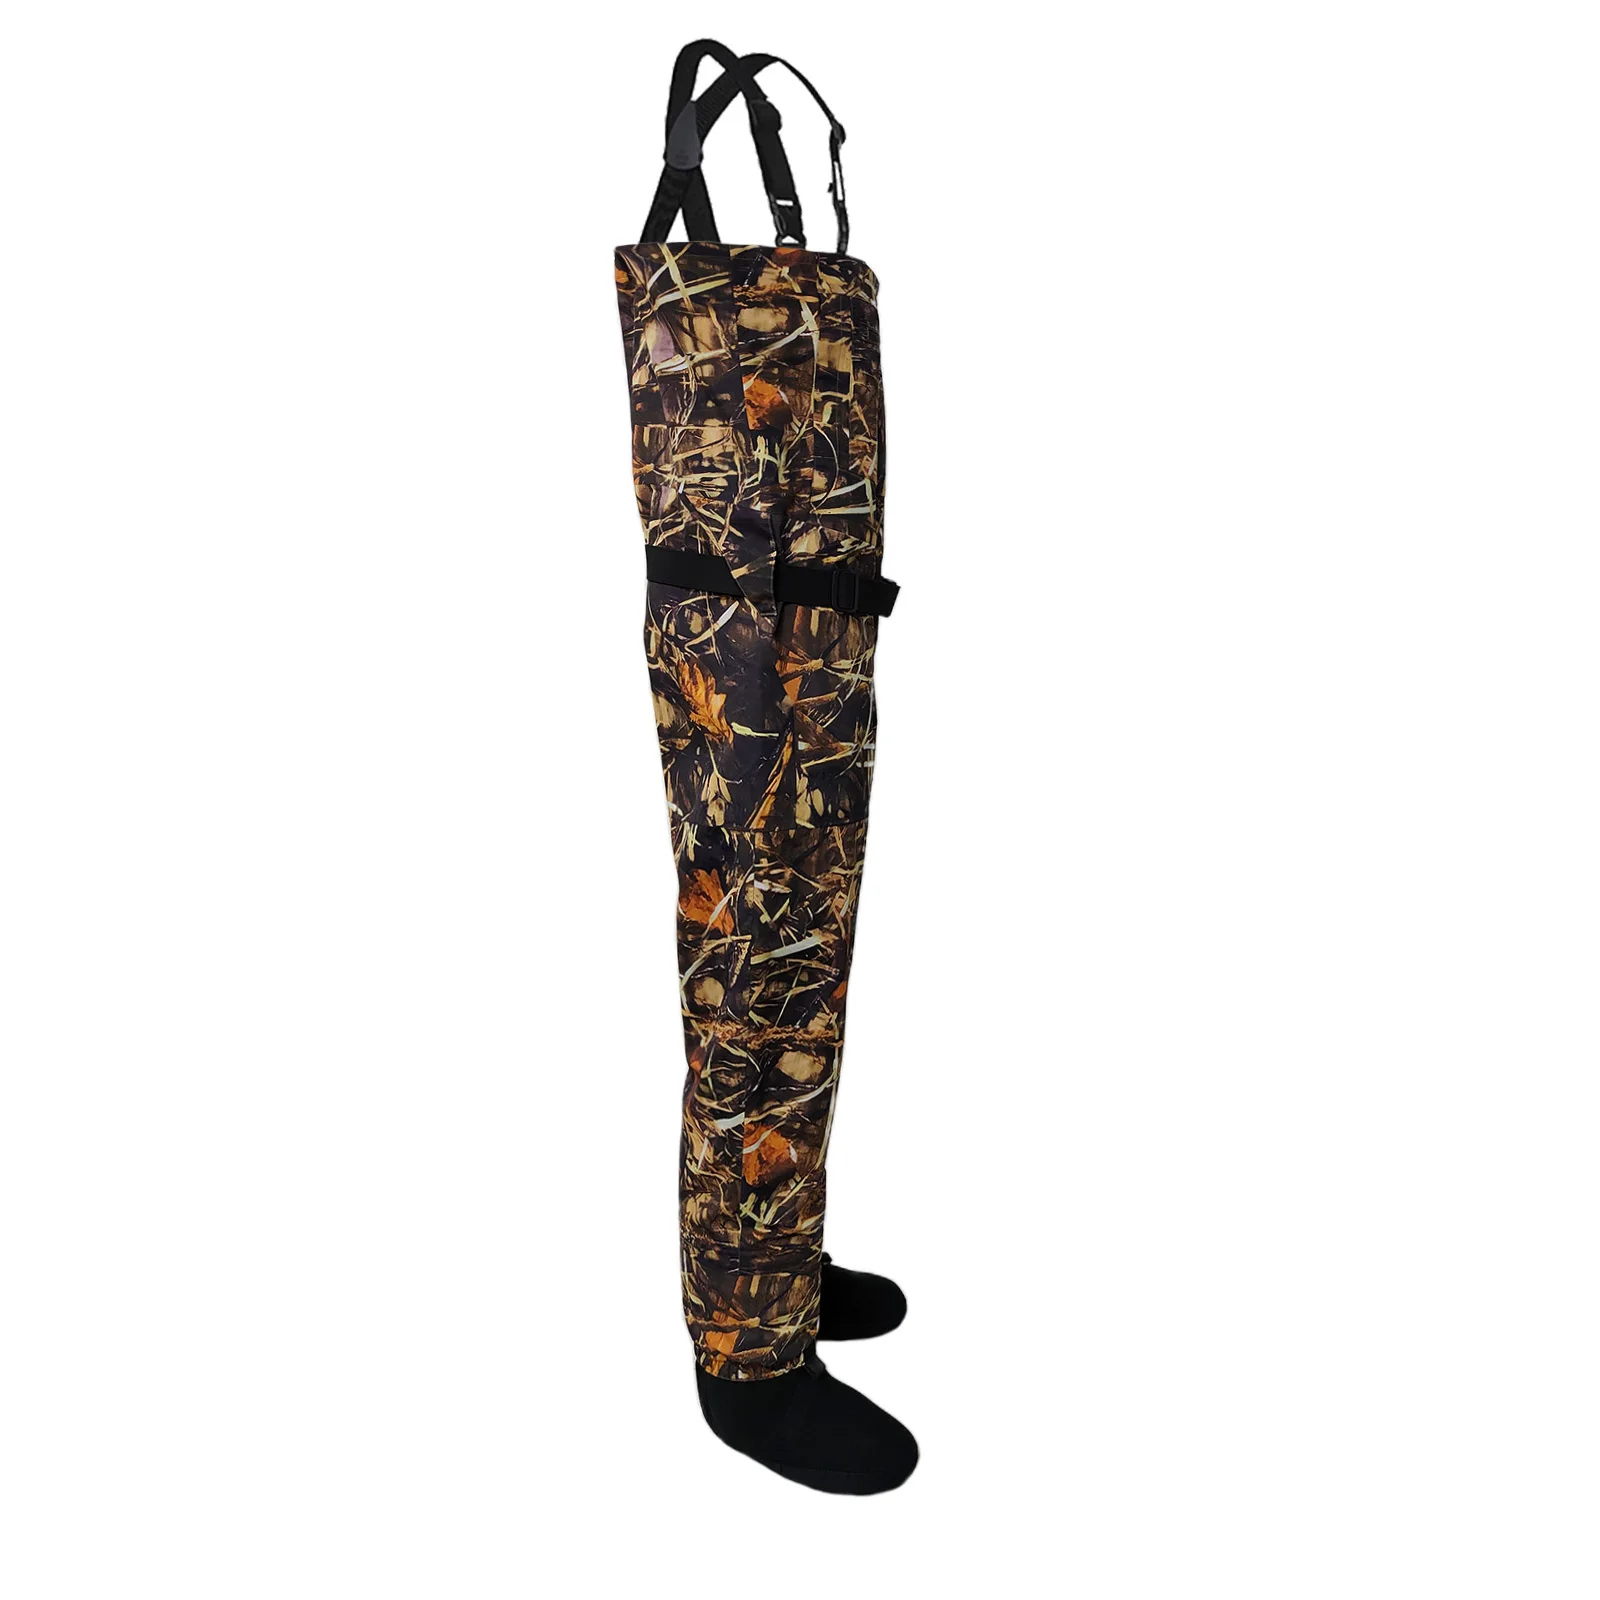 Men's Fishing Waders With Neoprene Socks  Breathable Waterproof Camouflage Pants With Adjustable Strap In Winter And Spring WM20 enlarge